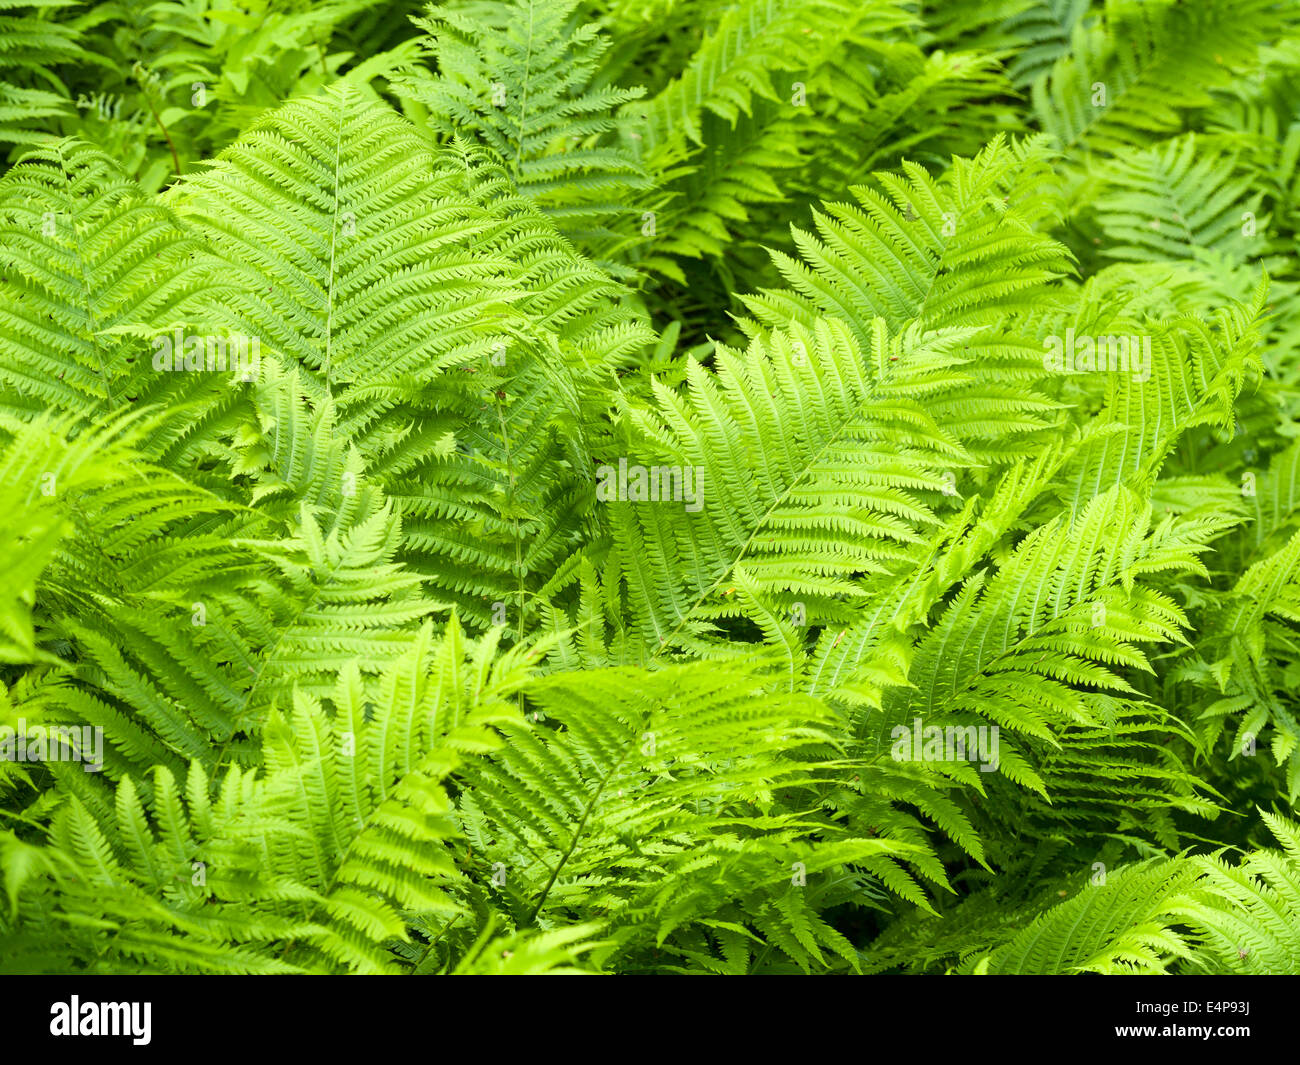 Overlapping Ferns. An exuberant growth of ferns on the forest floor. Fronds overlap and fill the frame. Stock Photo